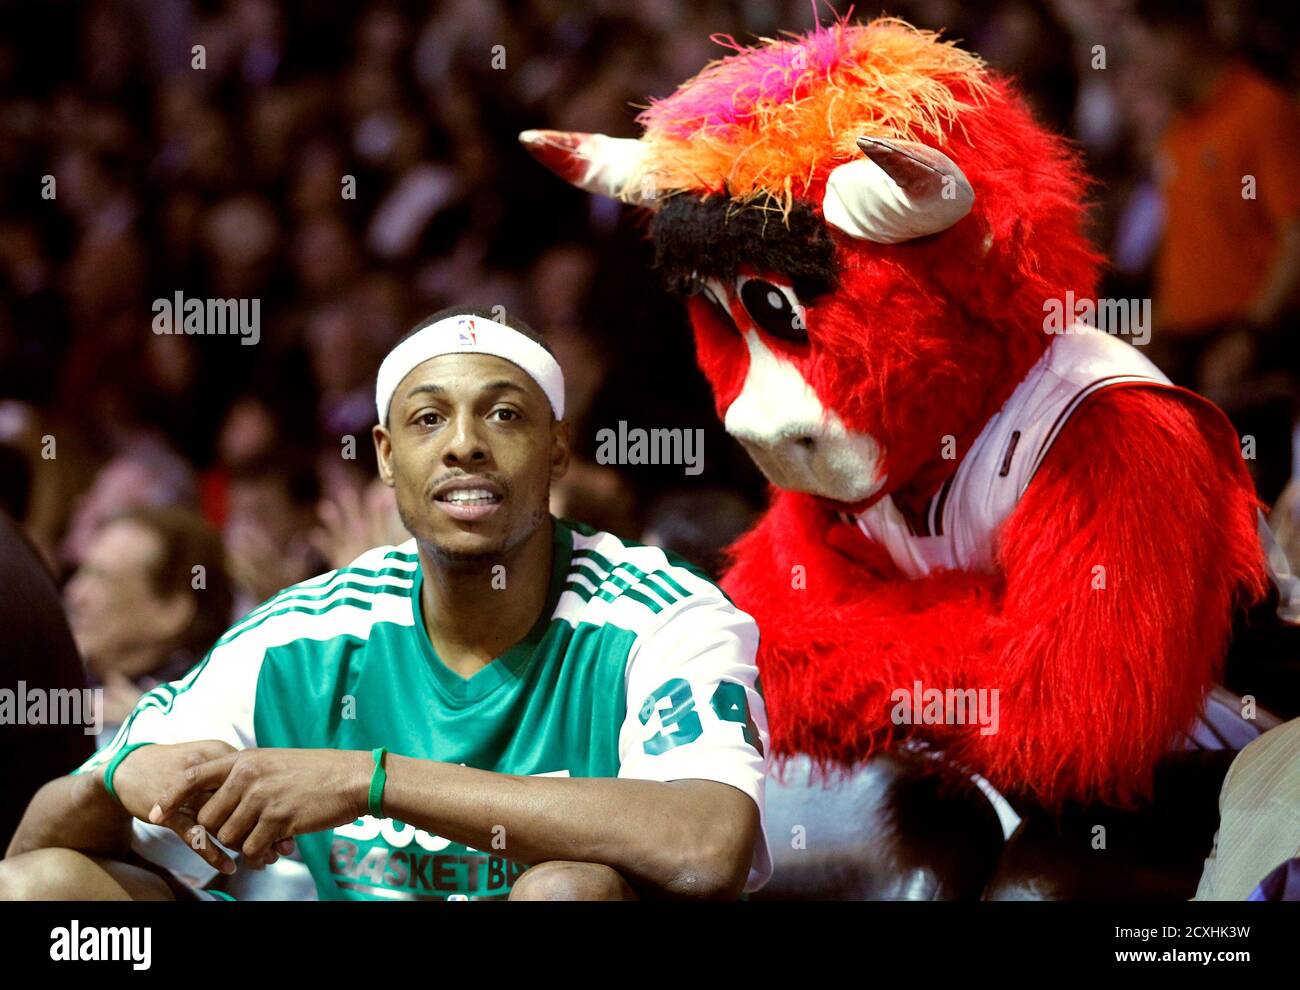 Celtics Mascot High Resolution Stock Photography And Images Alamy